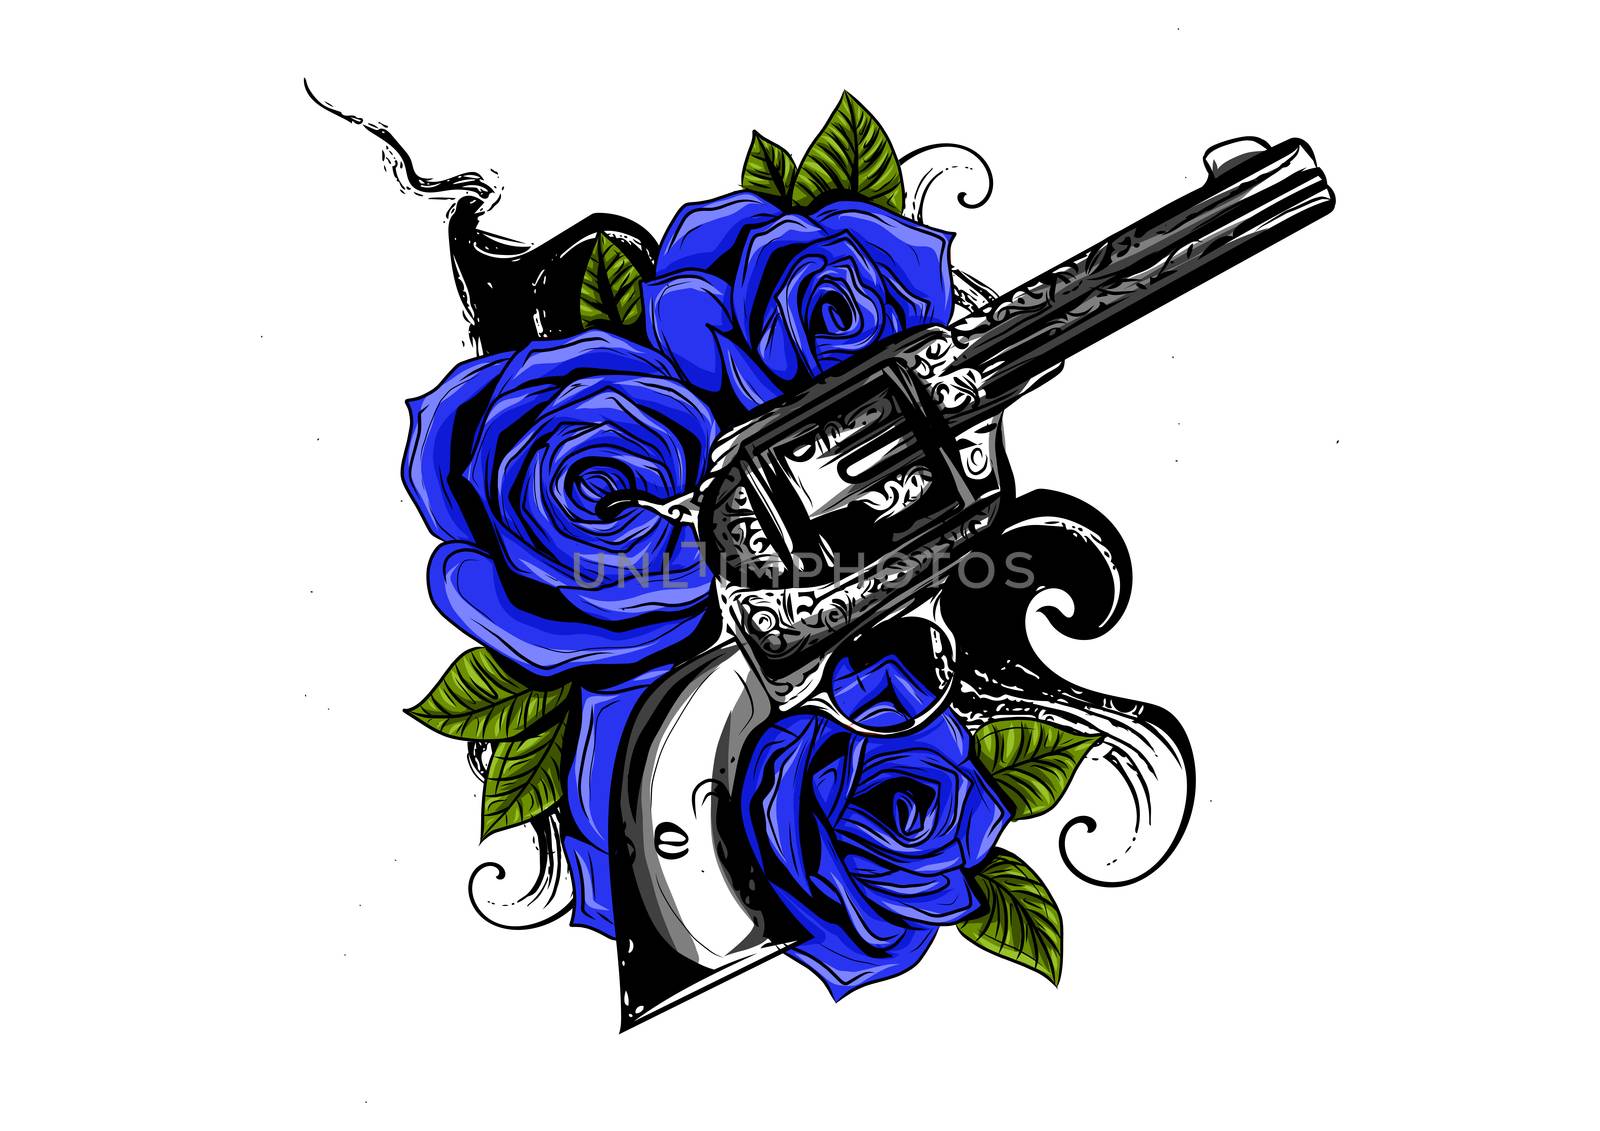 guns and rose flowers drawn in tattoo style. illustration. by dean